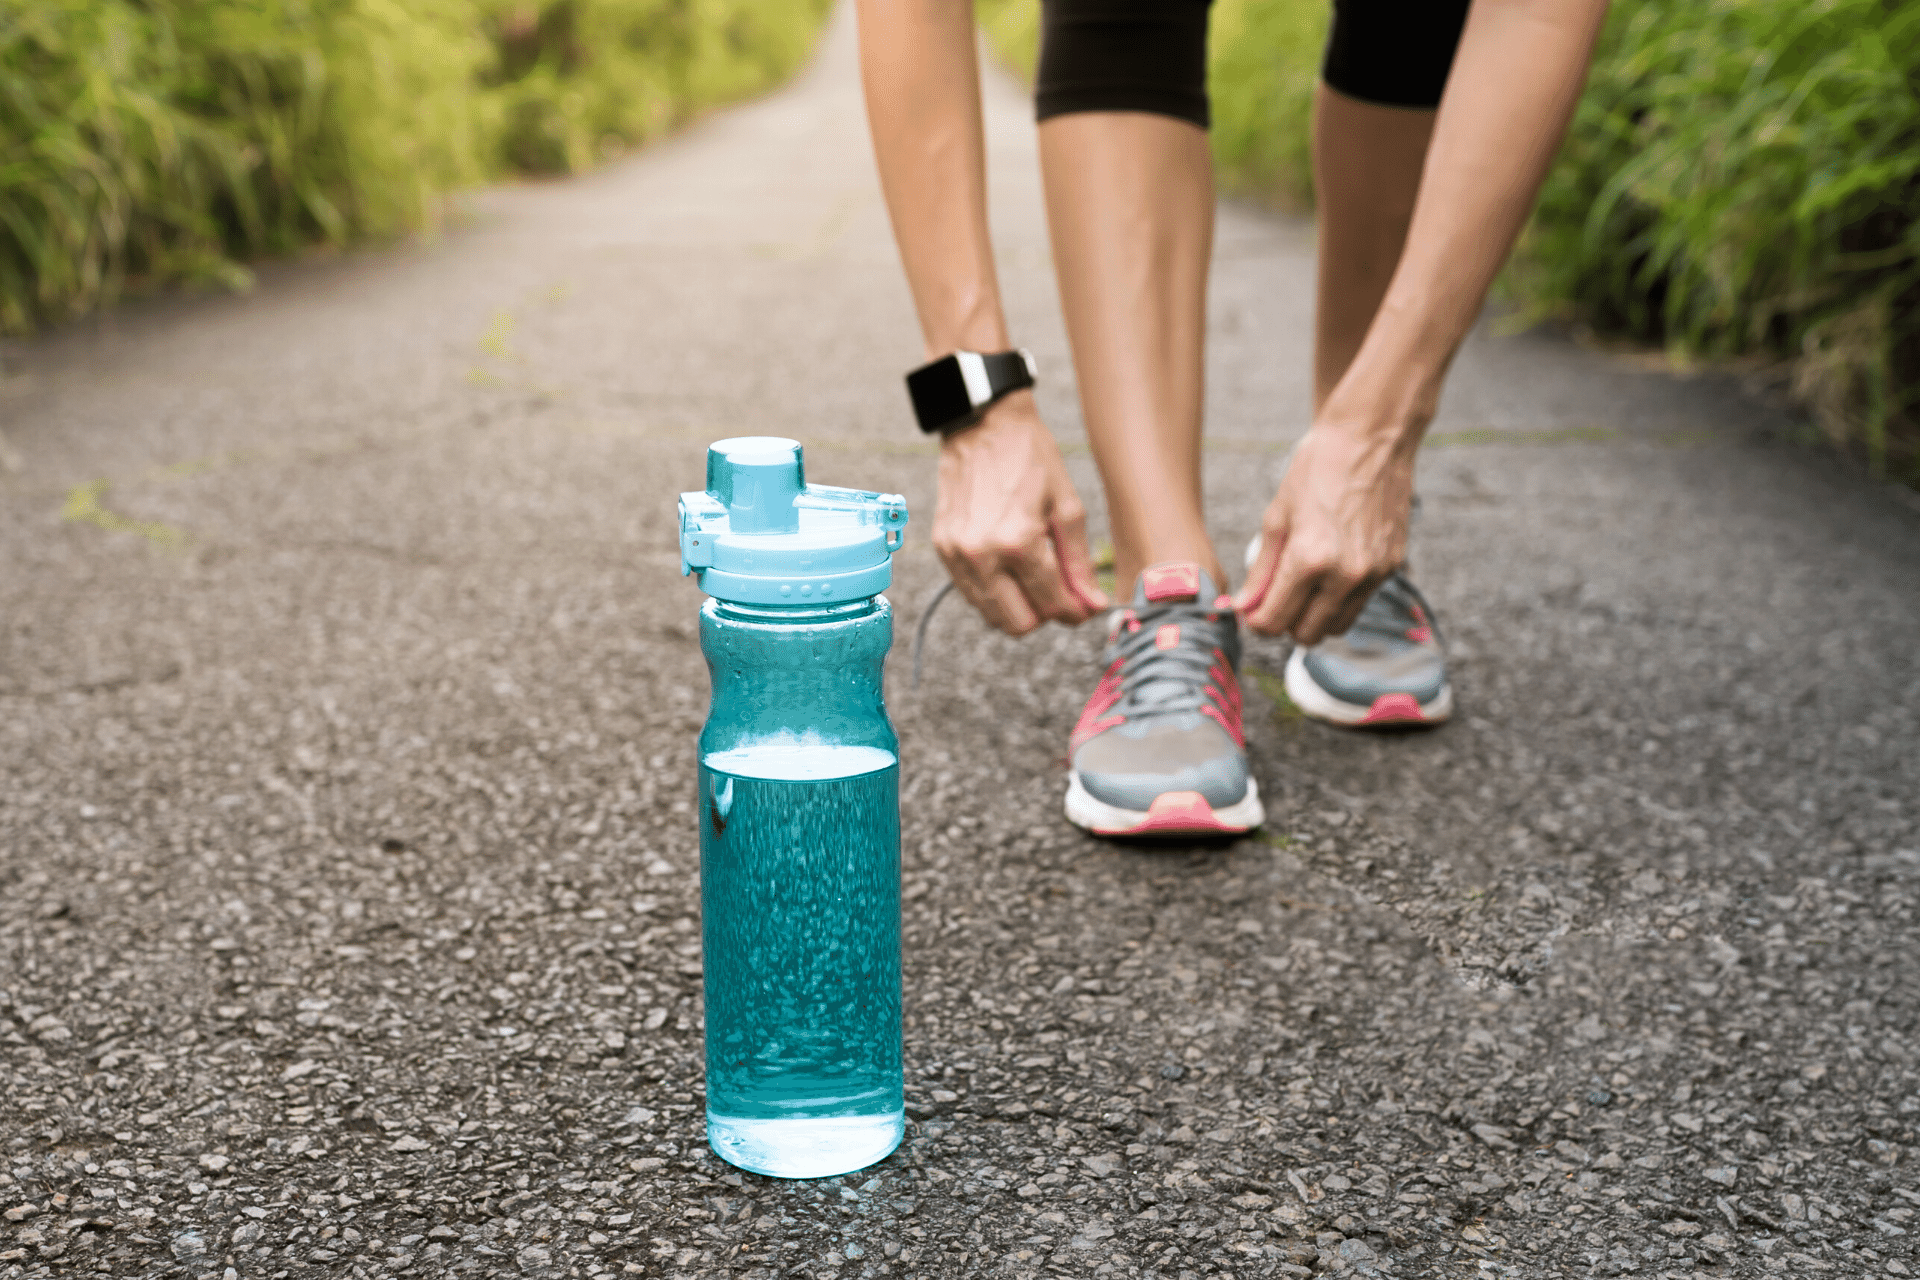 Electrolyte replacement after exercise